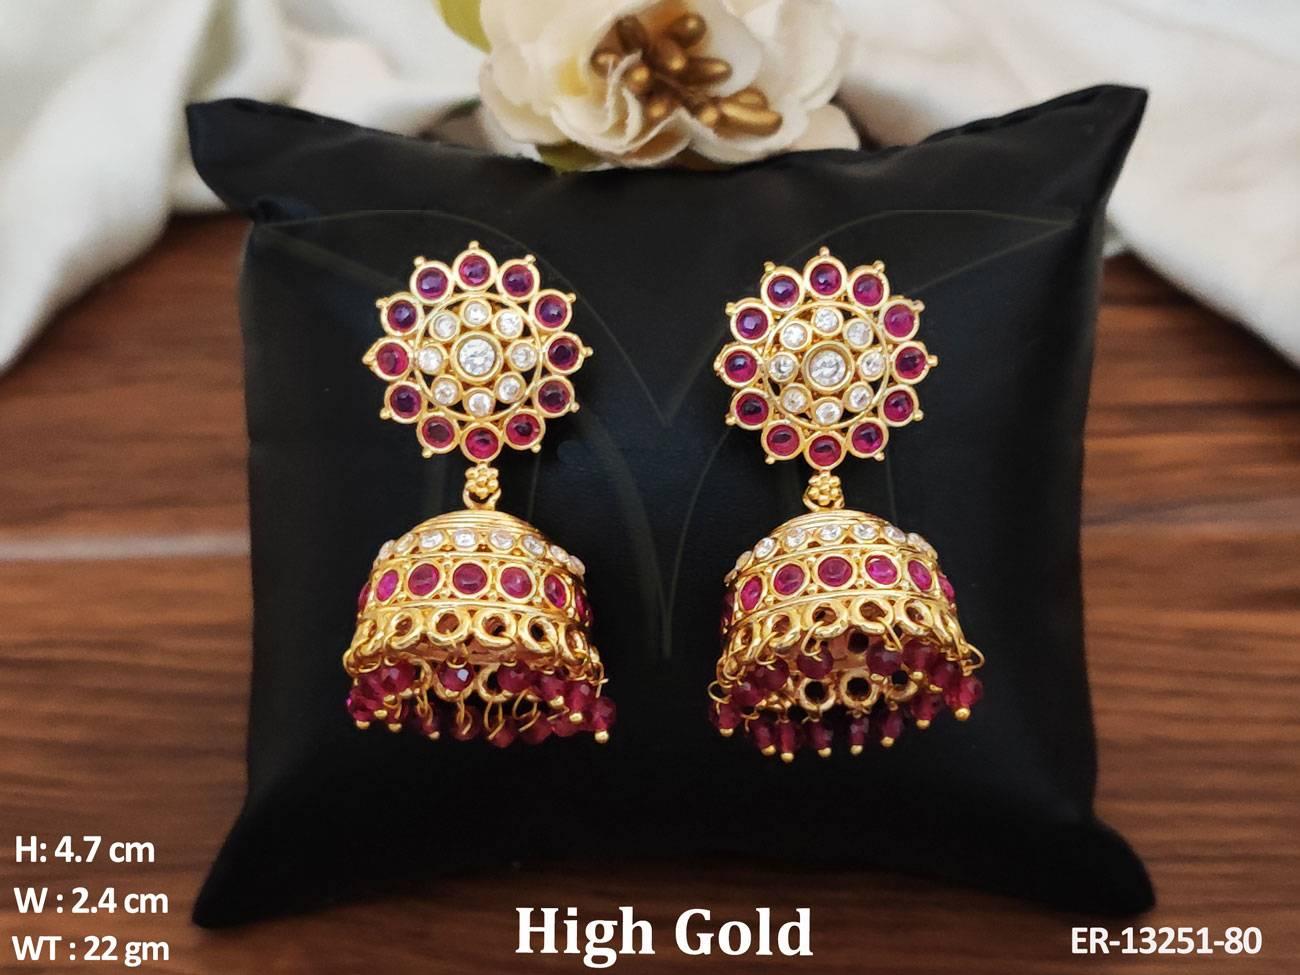 Antique Jhumka Earrings. Made with high-quality brass metal